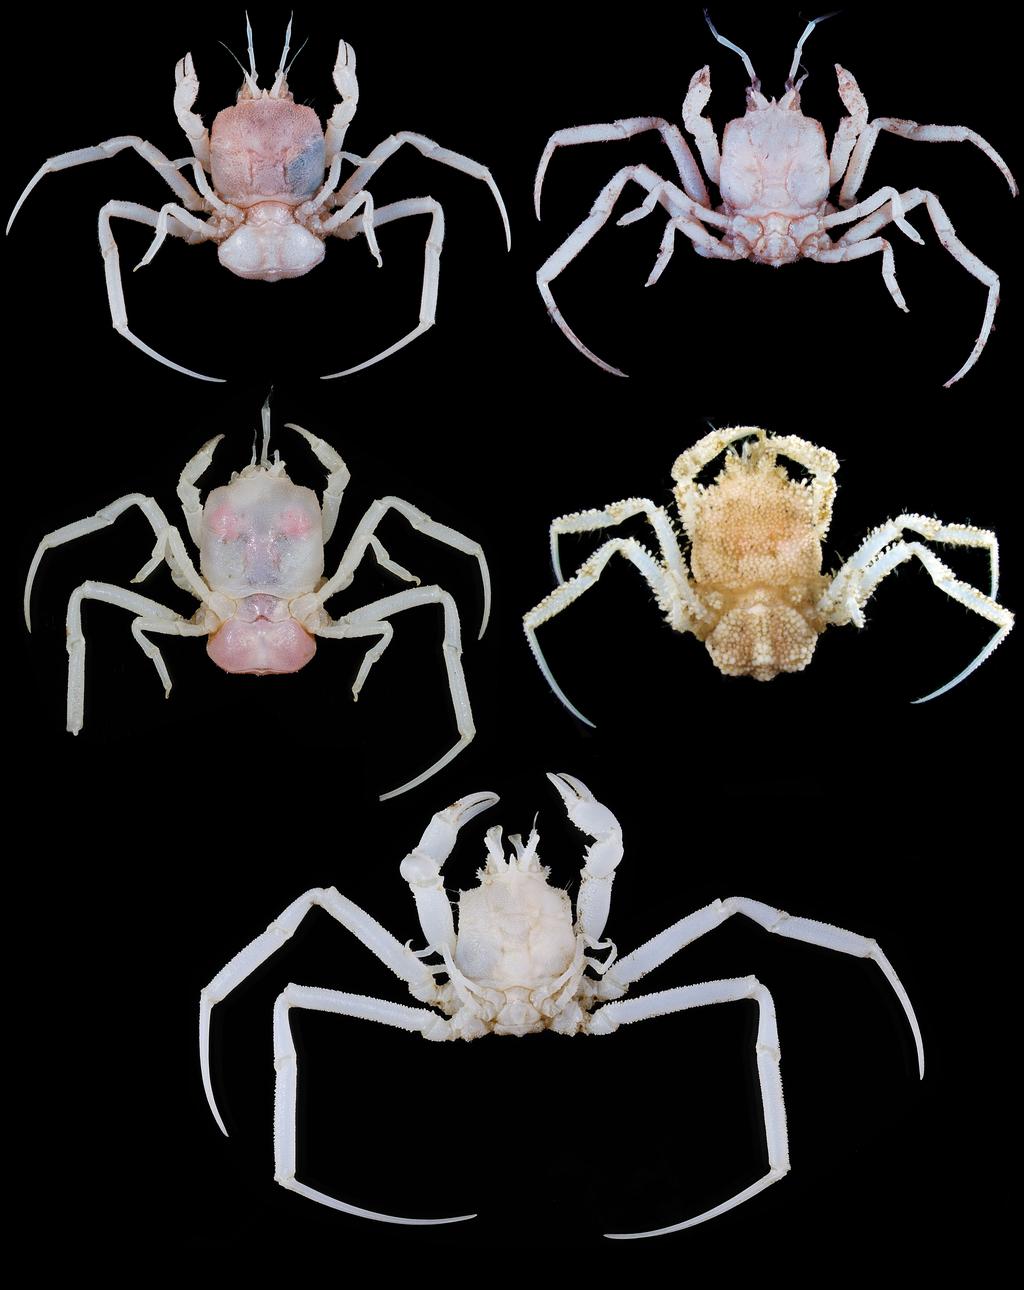 page 17 of 20 (B) (A) (C) (D) (E) Fig. 7. A, Cymonomus chani sp. nov., female holotype, pcl 7.9 mm, SW of Kaohsiung, Taiwan, NTOU; B, Cymonomus cognatus sp. nov., male holotype, pcl 6.